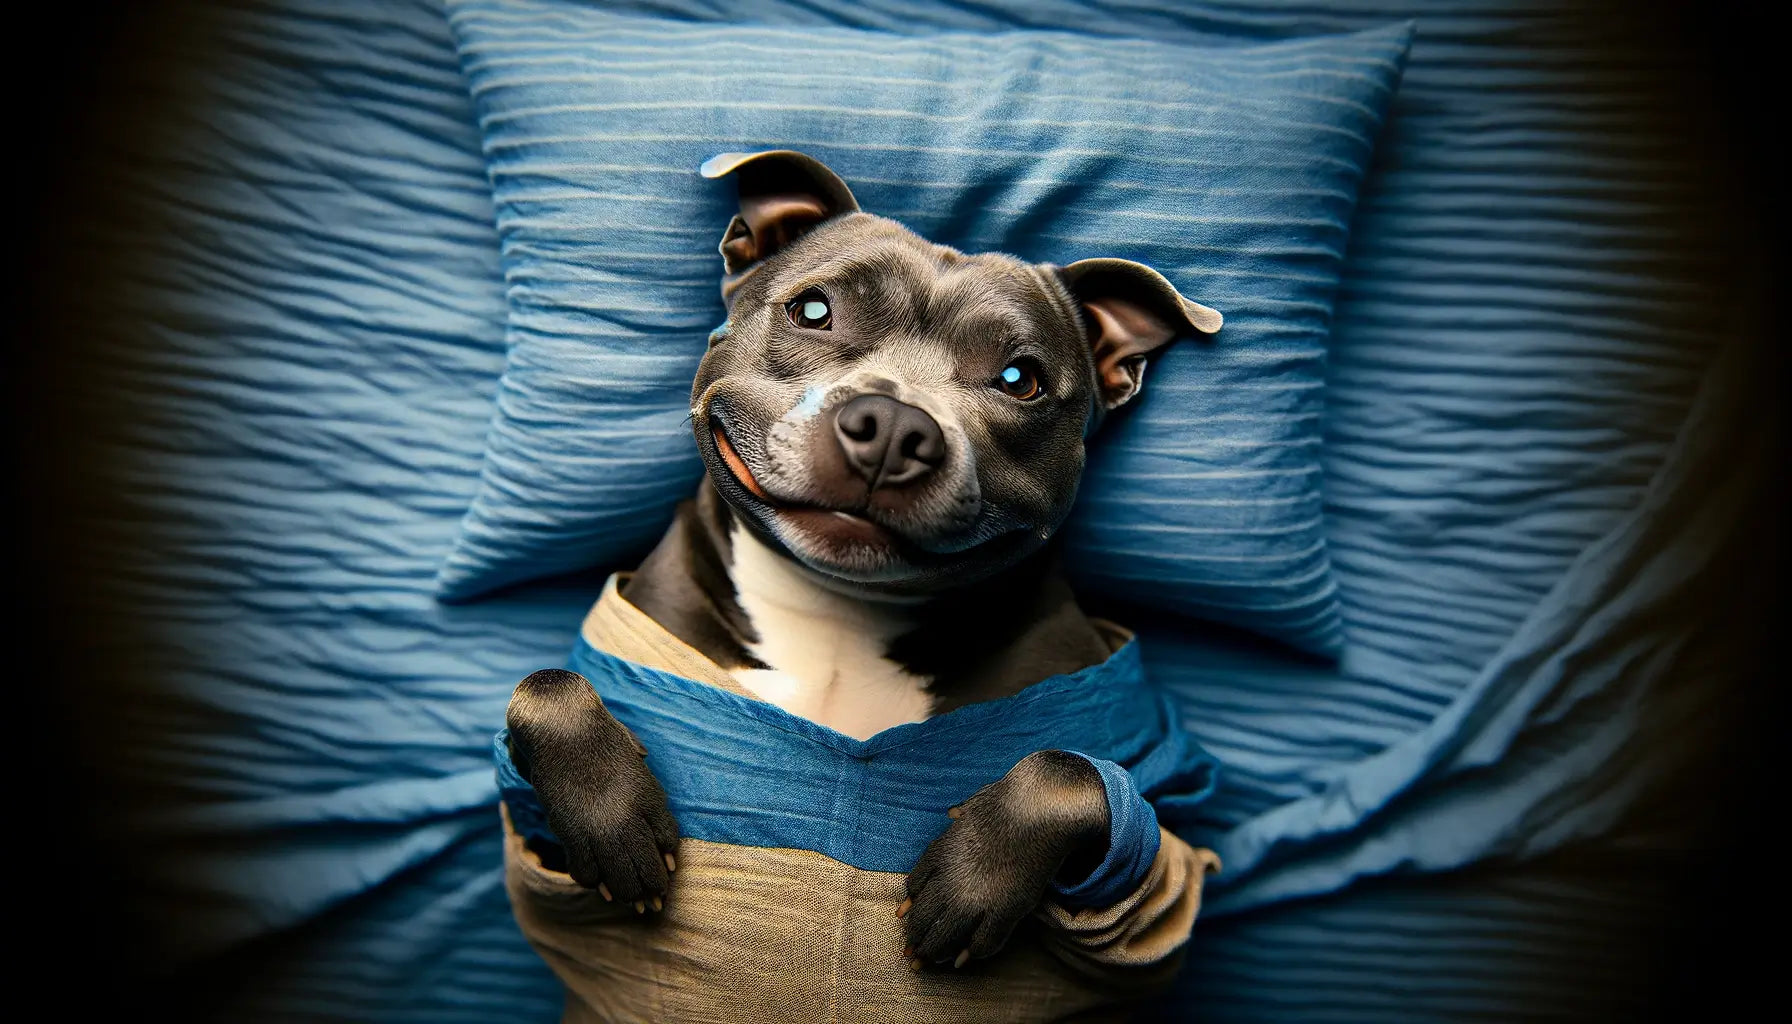 Blue Staffy lying on its back on a blue-striped fabric in a human-like pose.